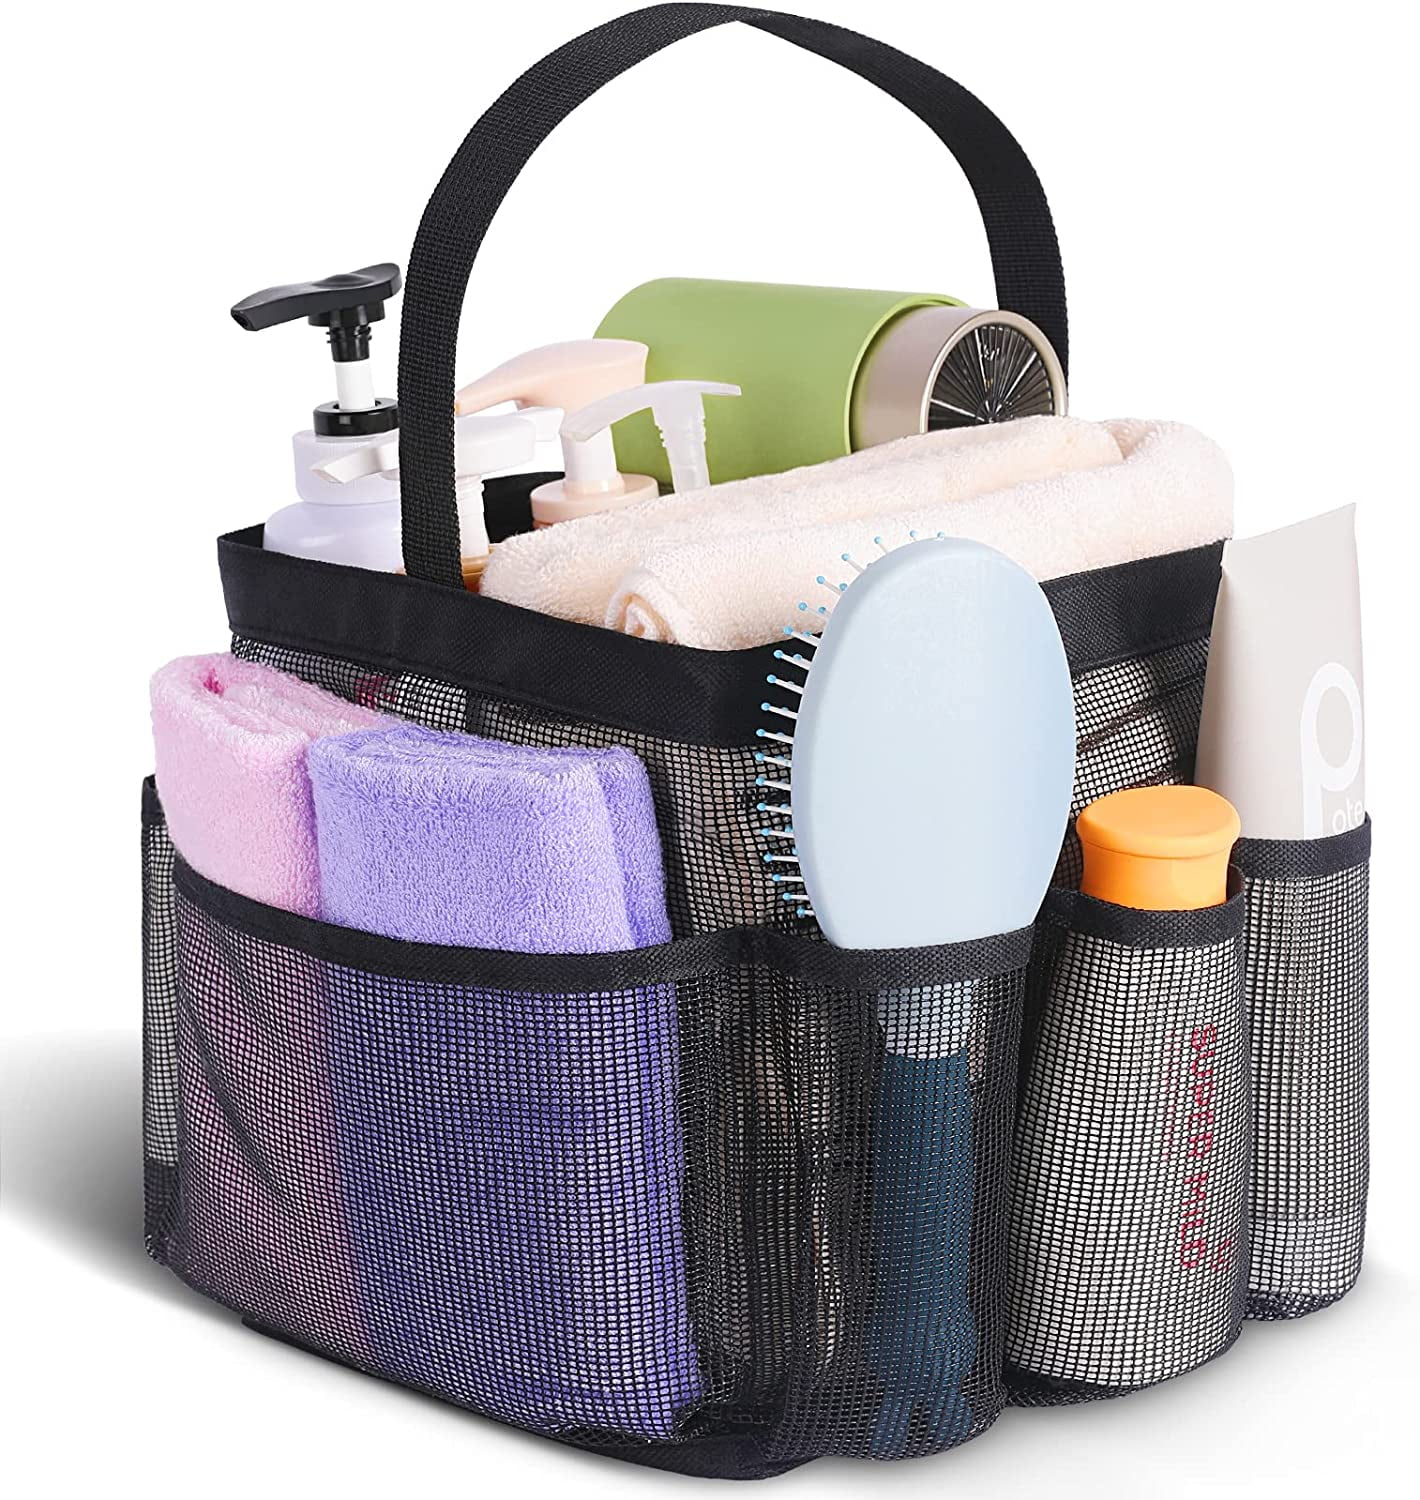 Mesh Shower Caddy Basket with 8 Storage Pockets, Portable Shower Tote Bag  Hanging Swimming Pool, Toiletry Bathroom Organizer for College Dorm Room